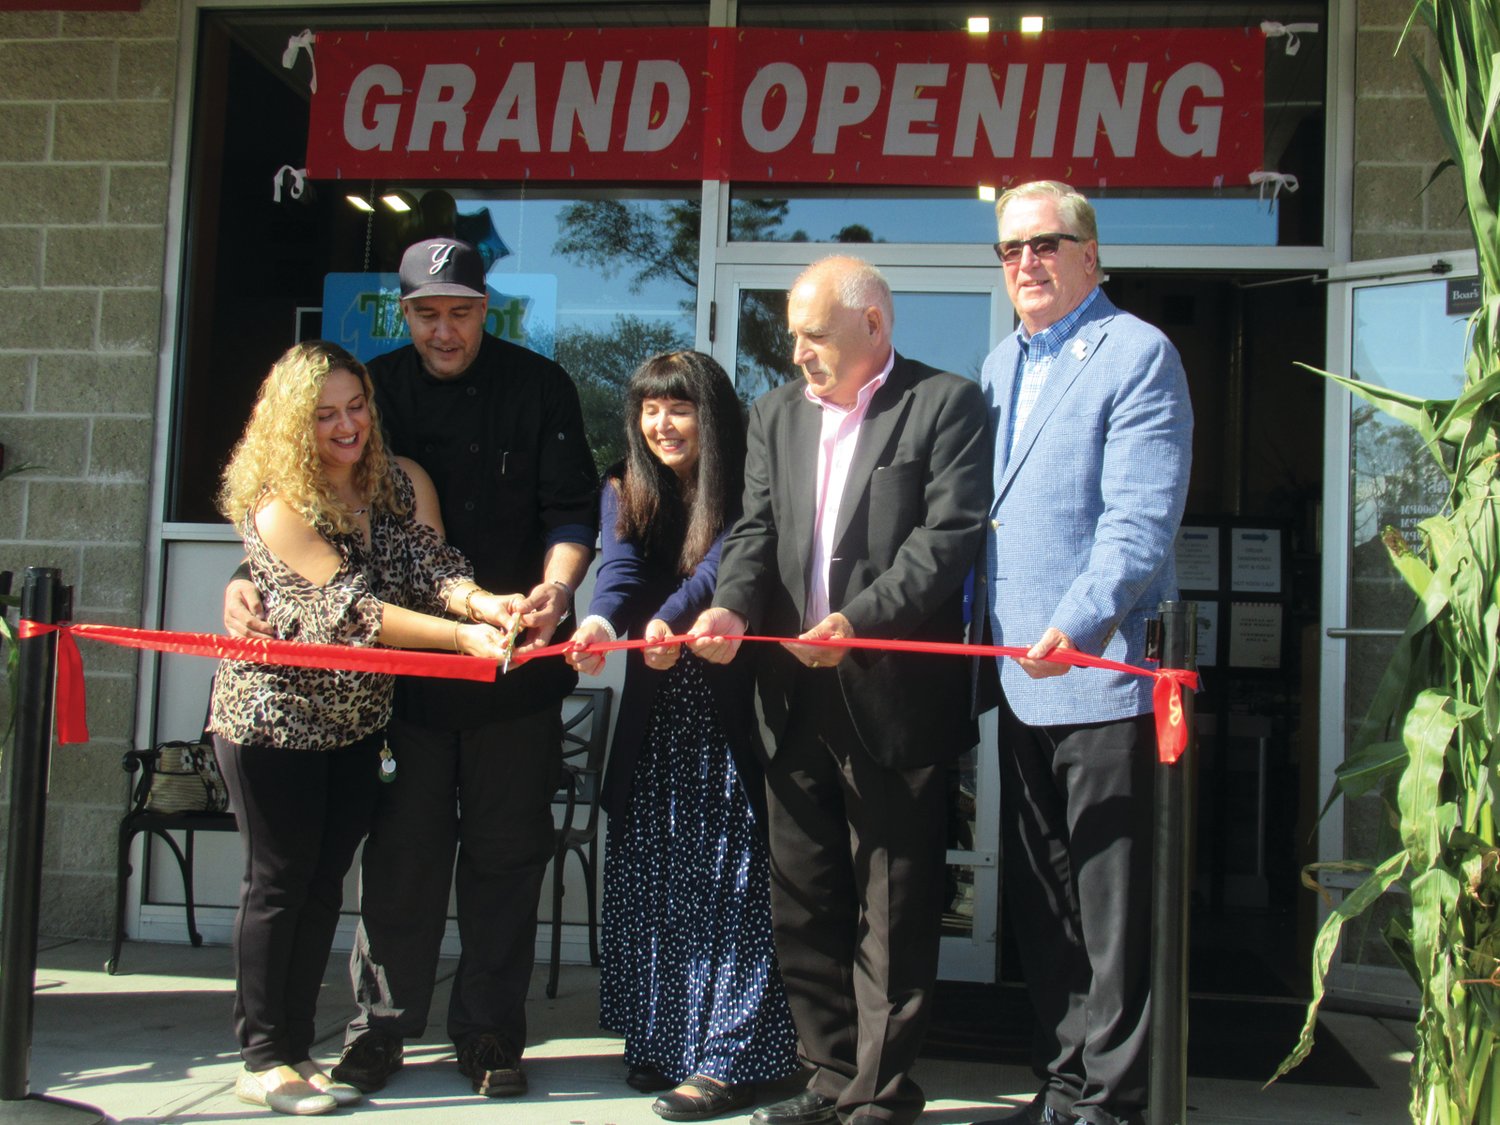 OFFICIAL OPENING: Jeff and Kim Paquette, assisted by Johnston Mayor Joseph Polisena, Cranston Mayor Ken Hopkins and Elaine Paquette make it official during Monday’s grand opening/ribbing cutting of Heaven and Earth Catering at Schroder’s Deli, 1302 Atwood Ave.